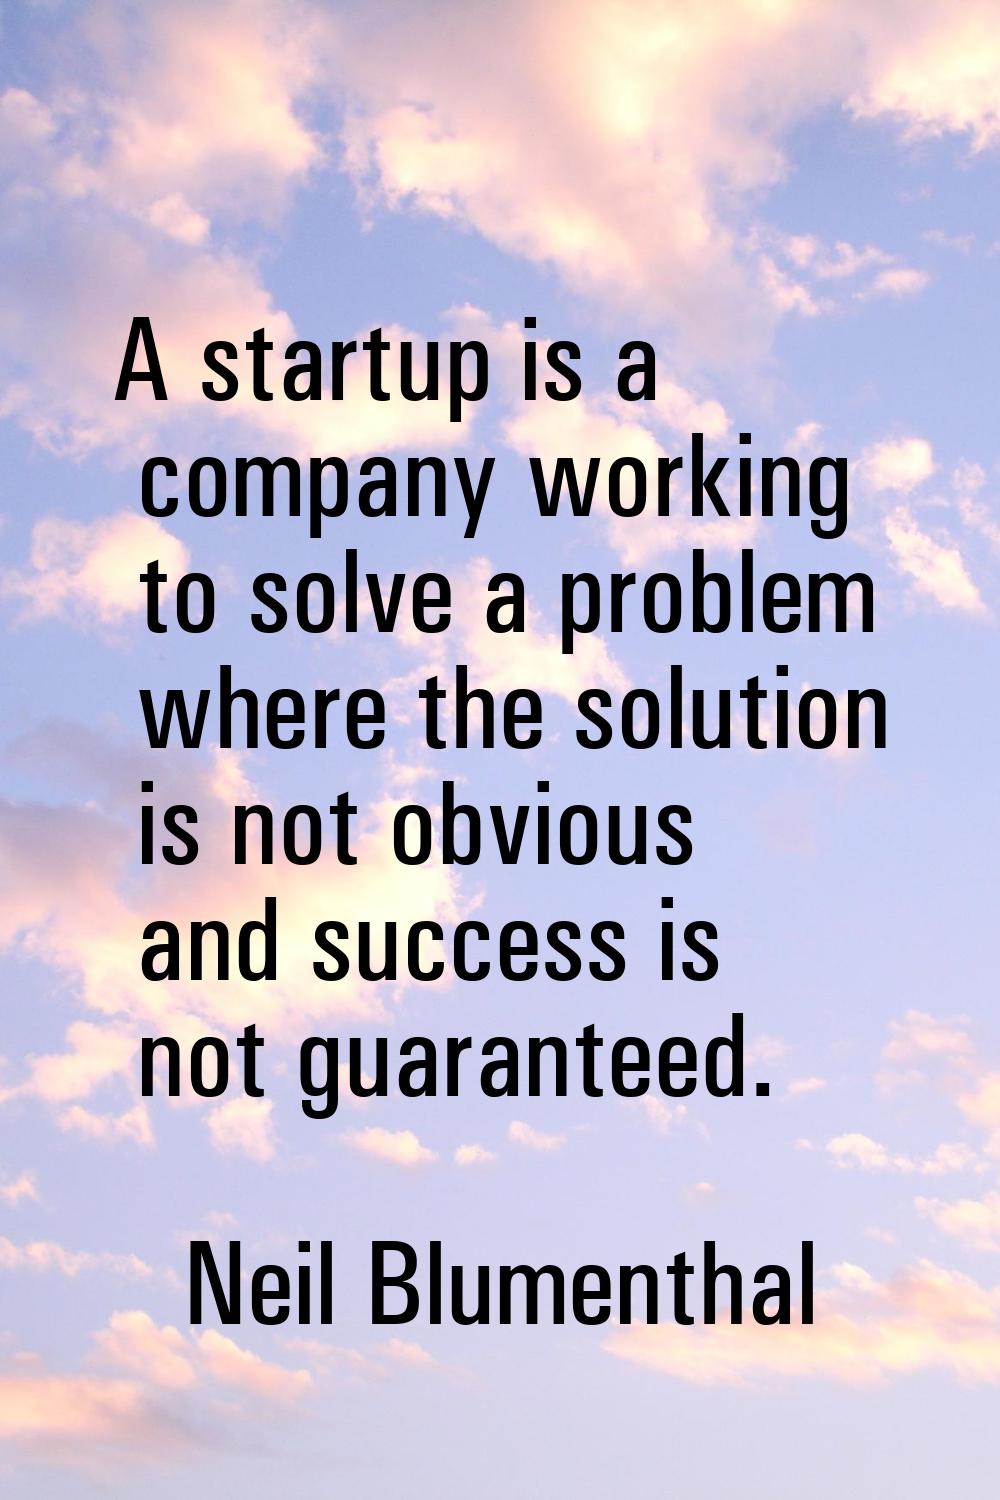 A startup is a company working to solve a problem where the solution is not obvious and success is 